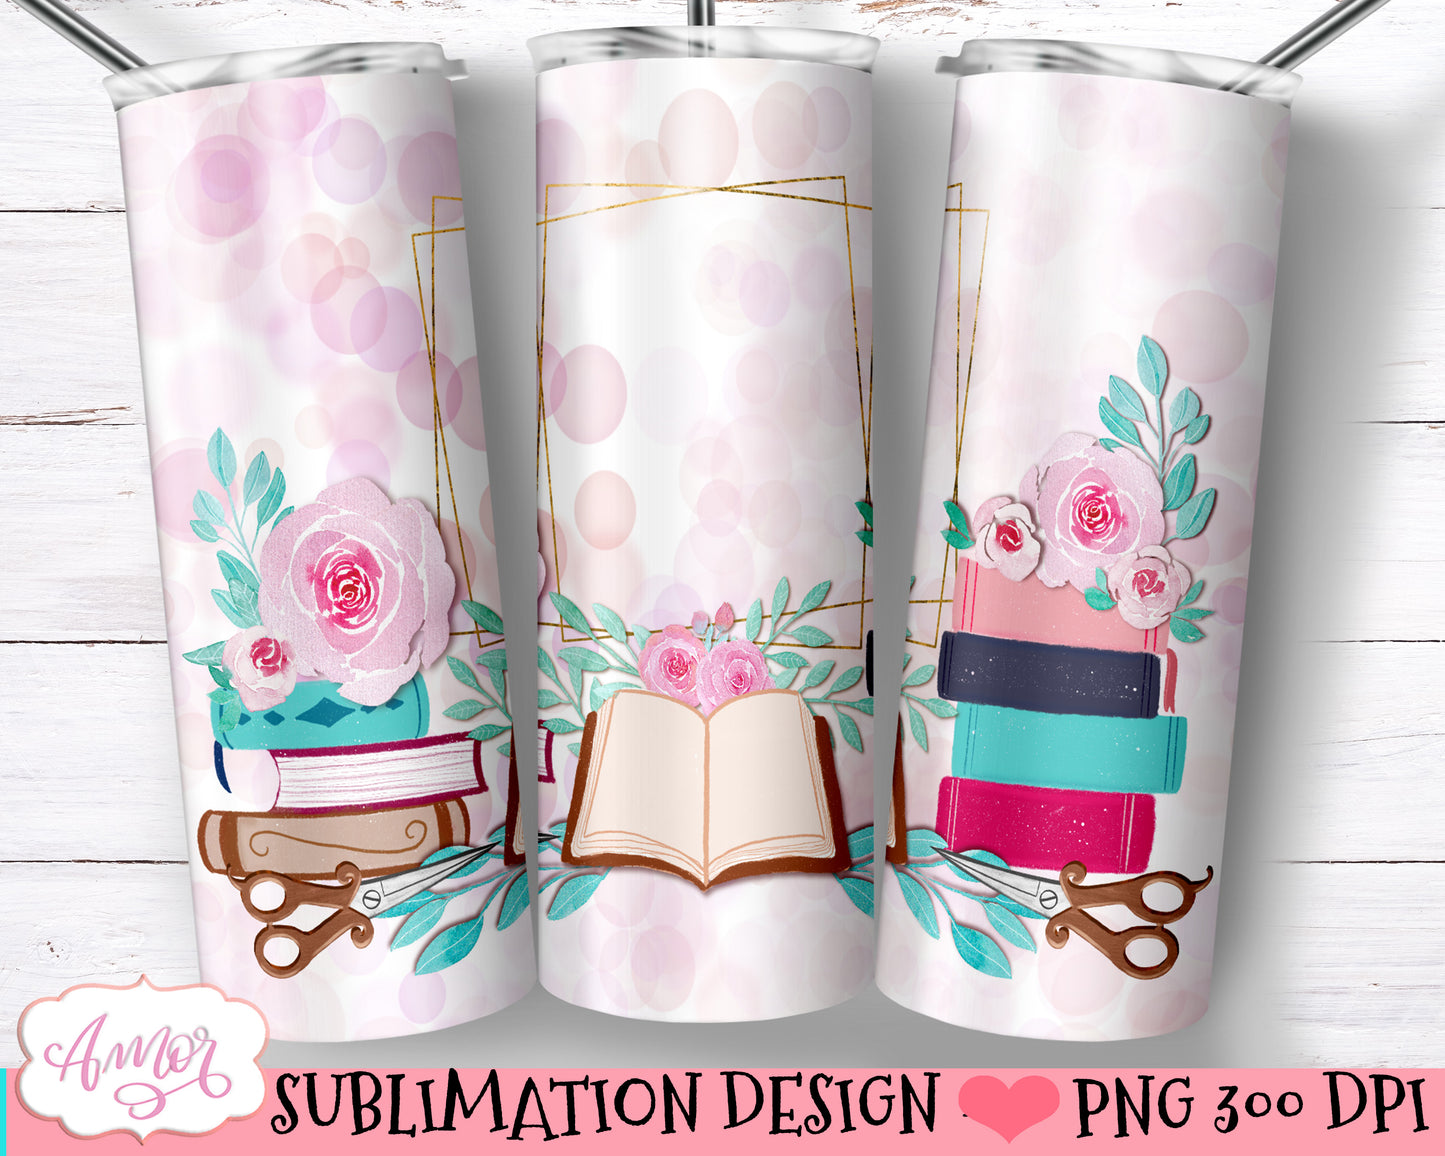 Book lover tumbler wrap for sublimation  Book tumbler PNG